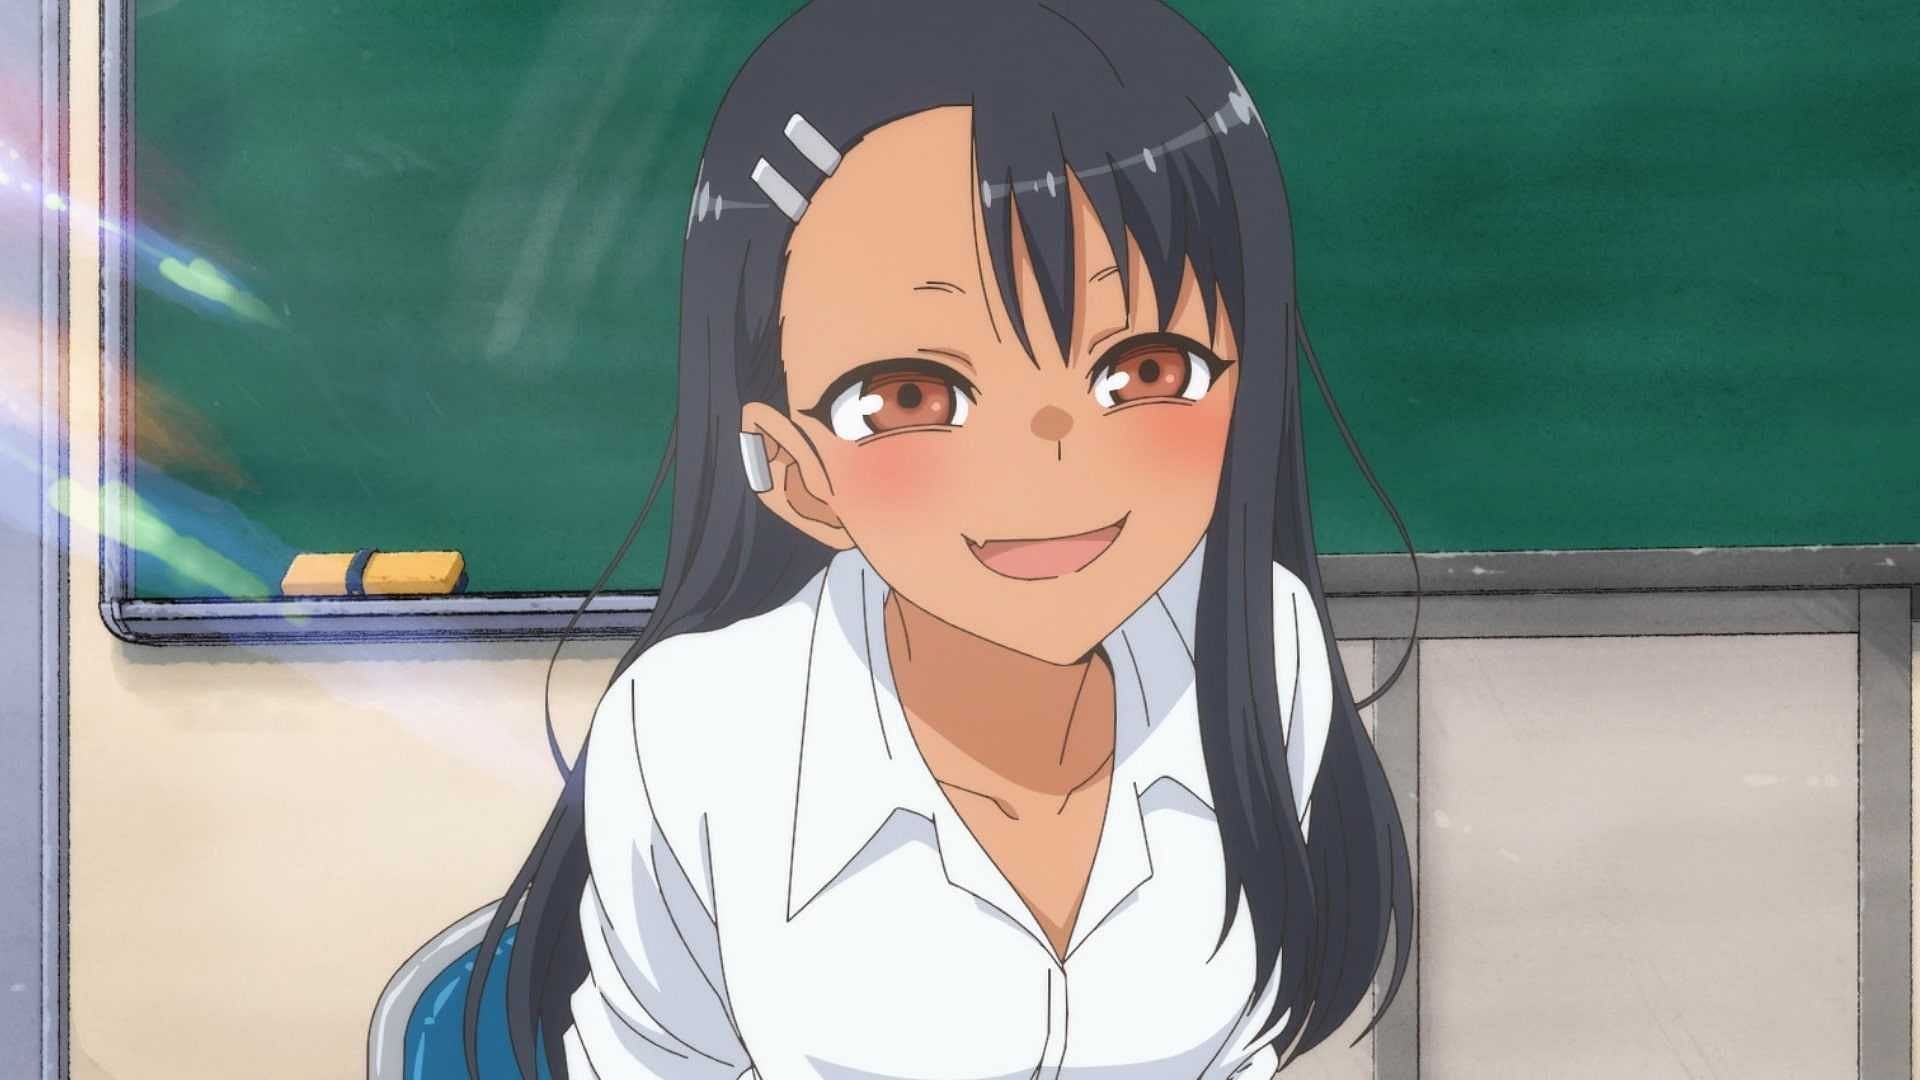 Watch Don't Toy With Me, Miss Nagatoro season 2 episode 6 streaming online